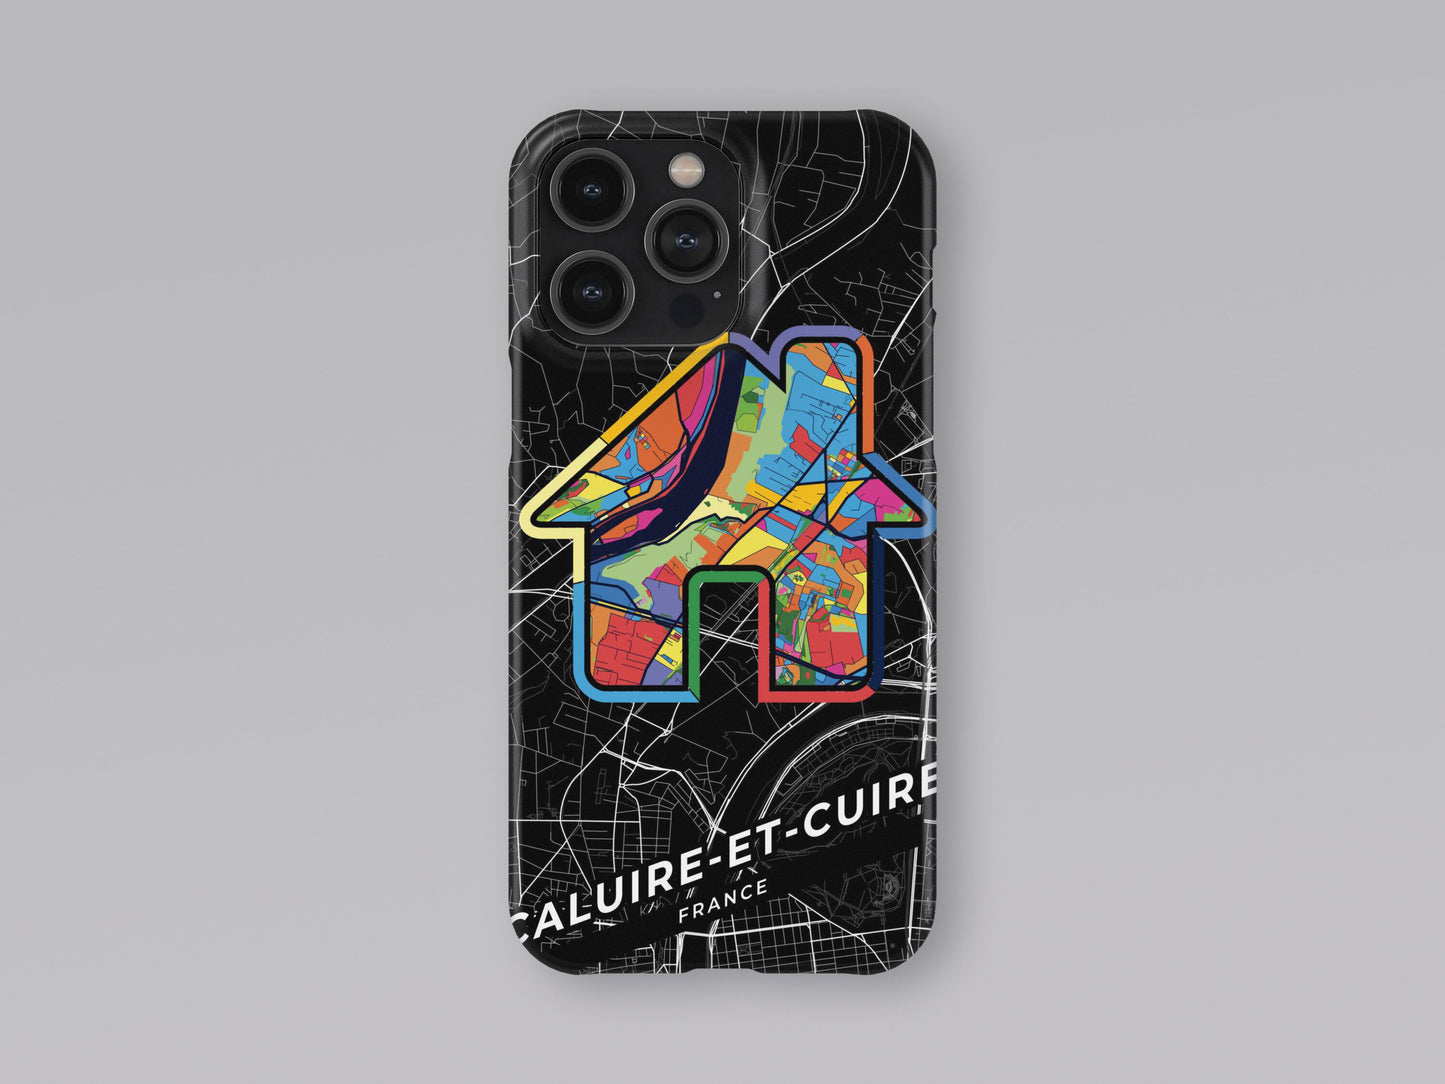 Caluire-Et-Cuire France slim phone case with colorful icon. Birthday, wedding or housewarming gift. Couple match cases. 3